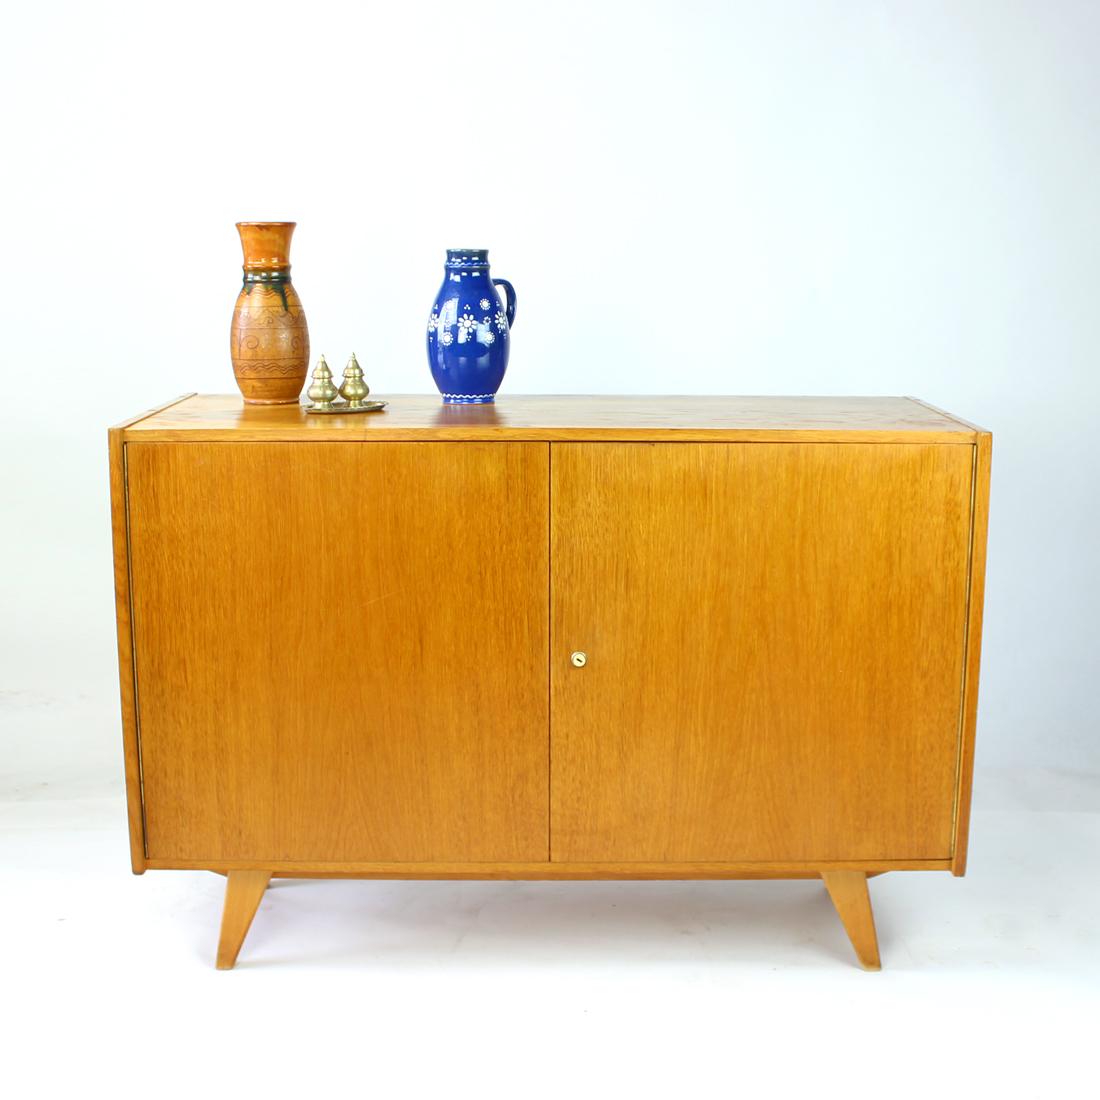 Iconic sideboard produced as a U450 Model by Interier Praha in 1960s. Designed by Jiri Jiroutek. Original label still attached in a beautiful condition on the back. The sideboard has been partially restored, the top board and wooden frame has been